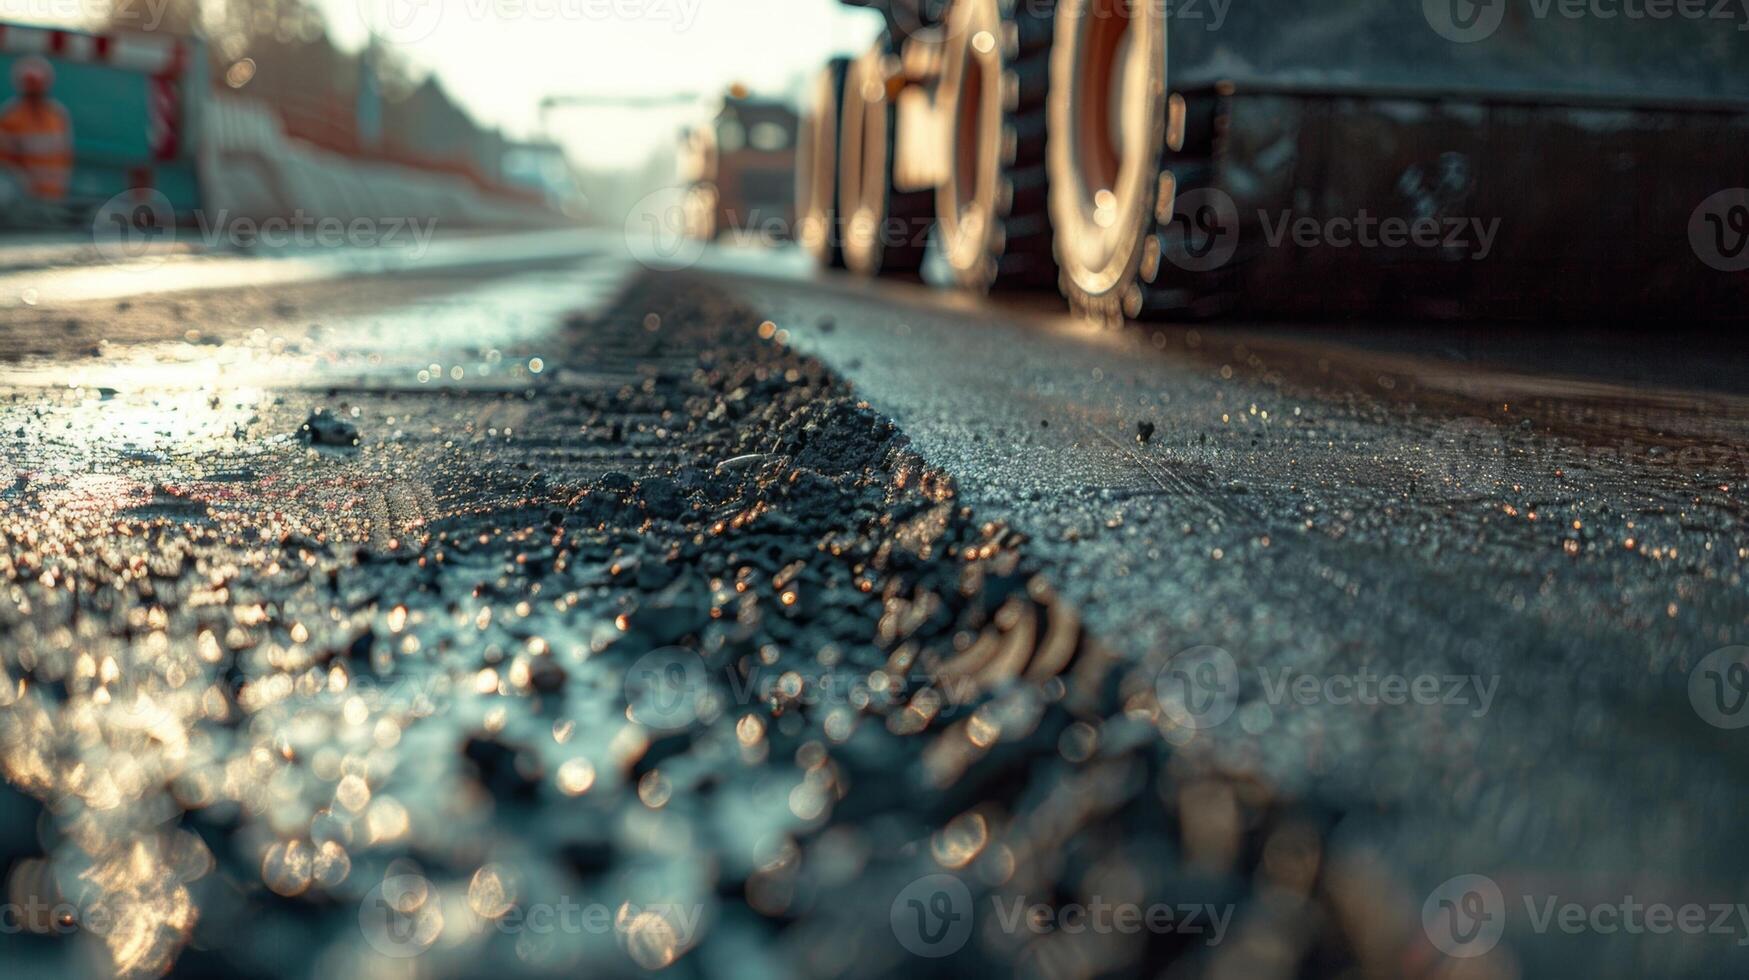 The smooth movements of the machine create a satisfying rhythm as it produces the foundation of a new road photo